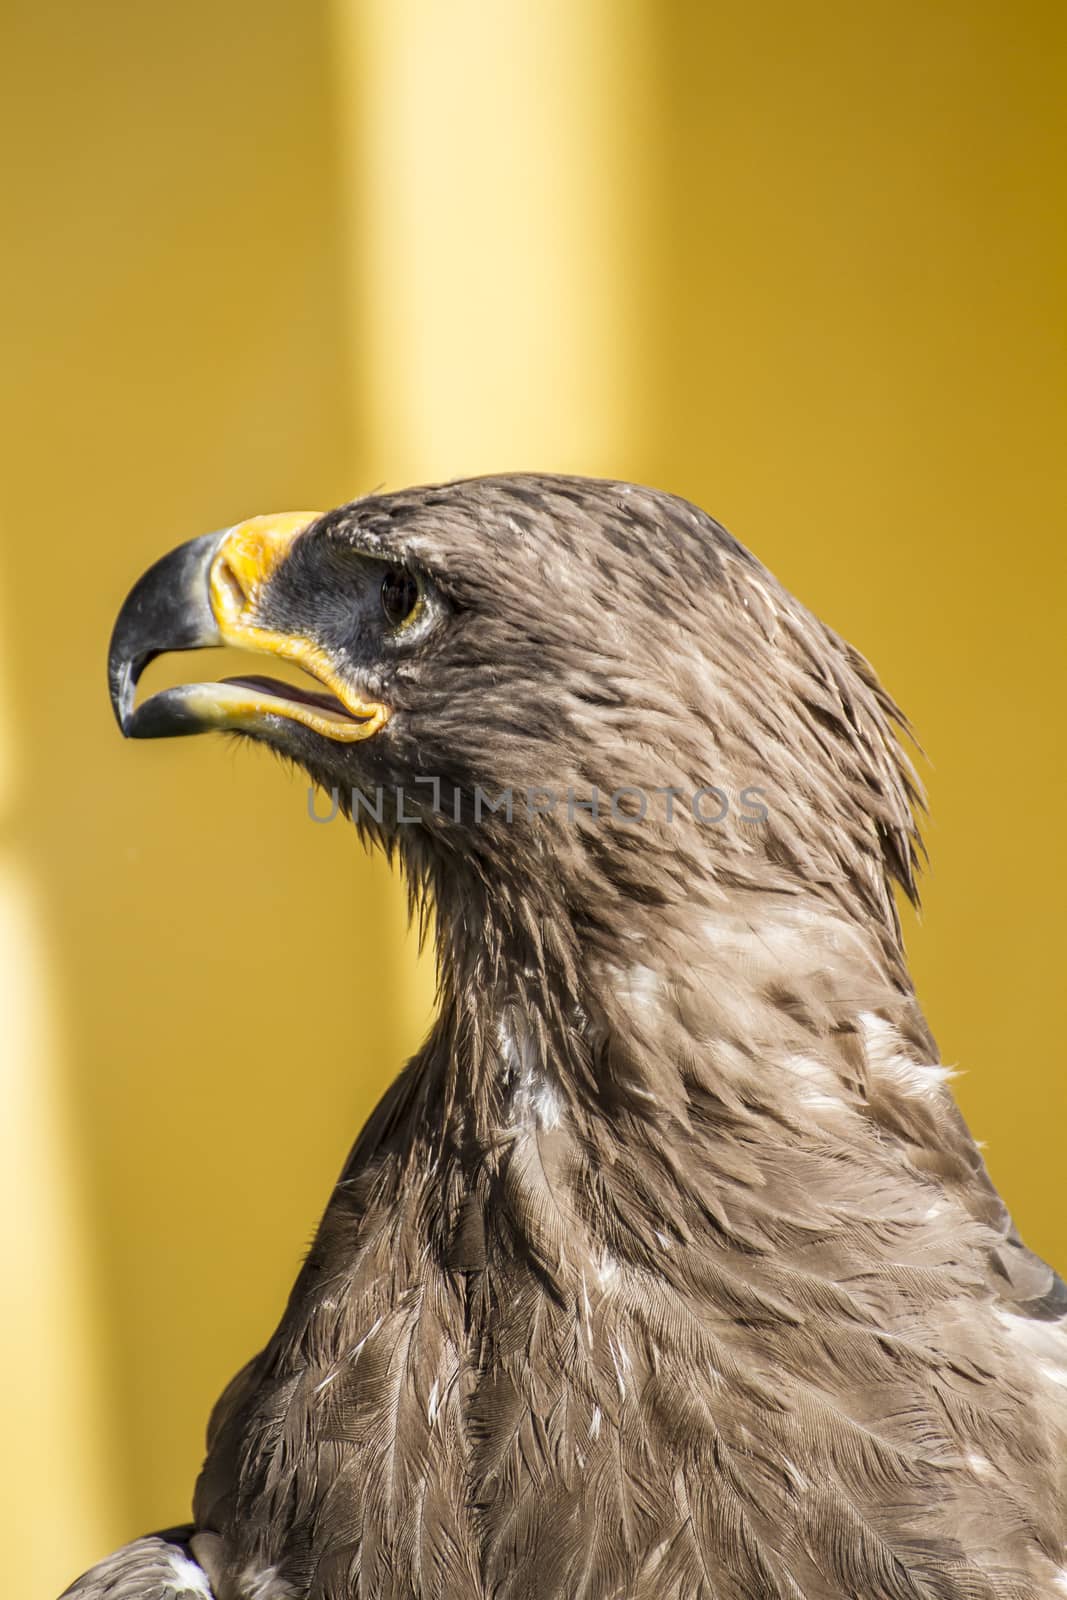 wild, golden eagle, detail of head with large eyes, pointed beak by FernandoCortes